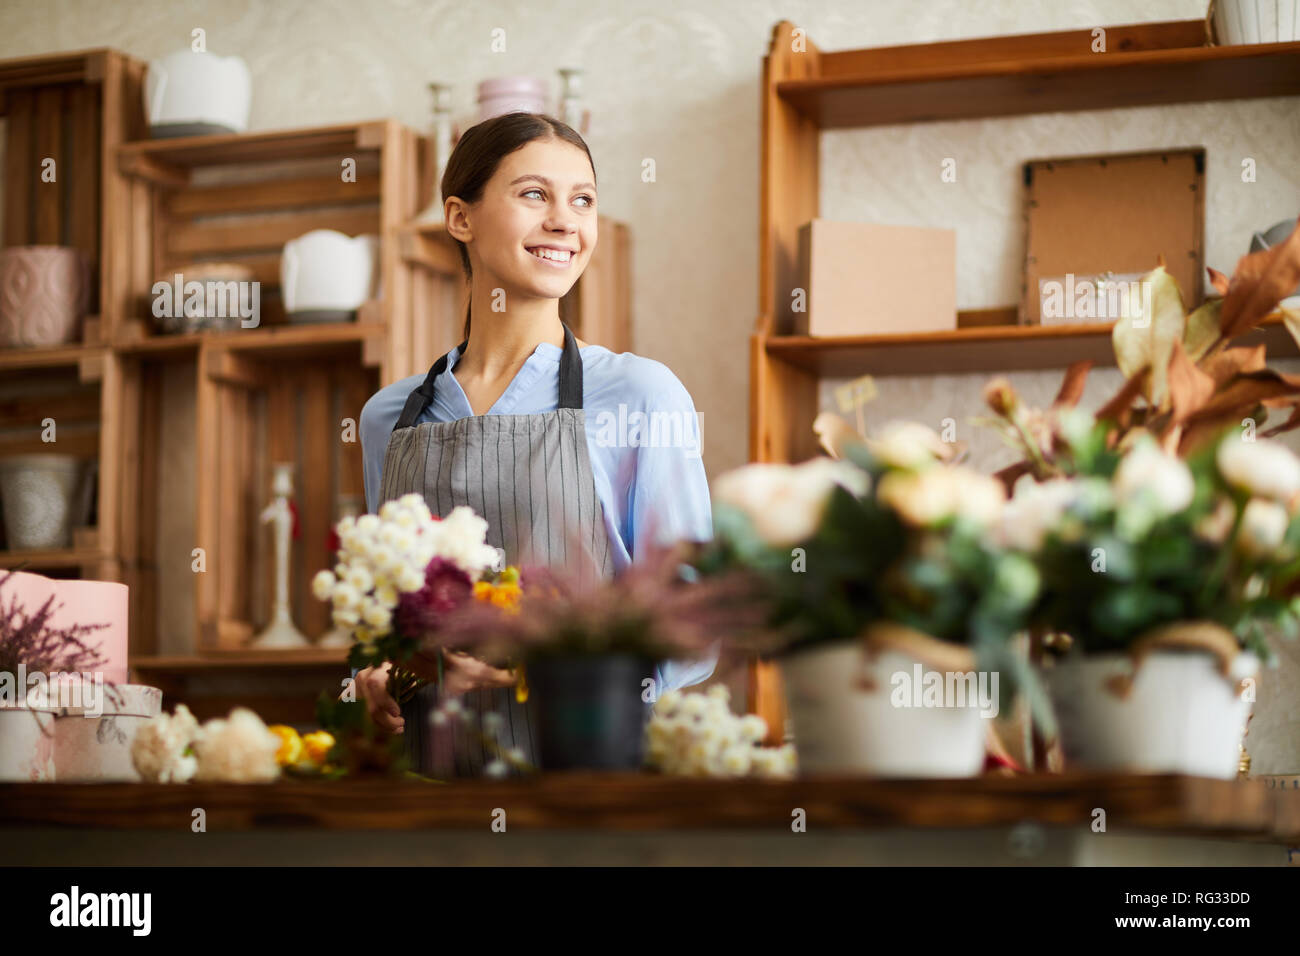 Smiling Woman Working in Flower Shop Stock Photo